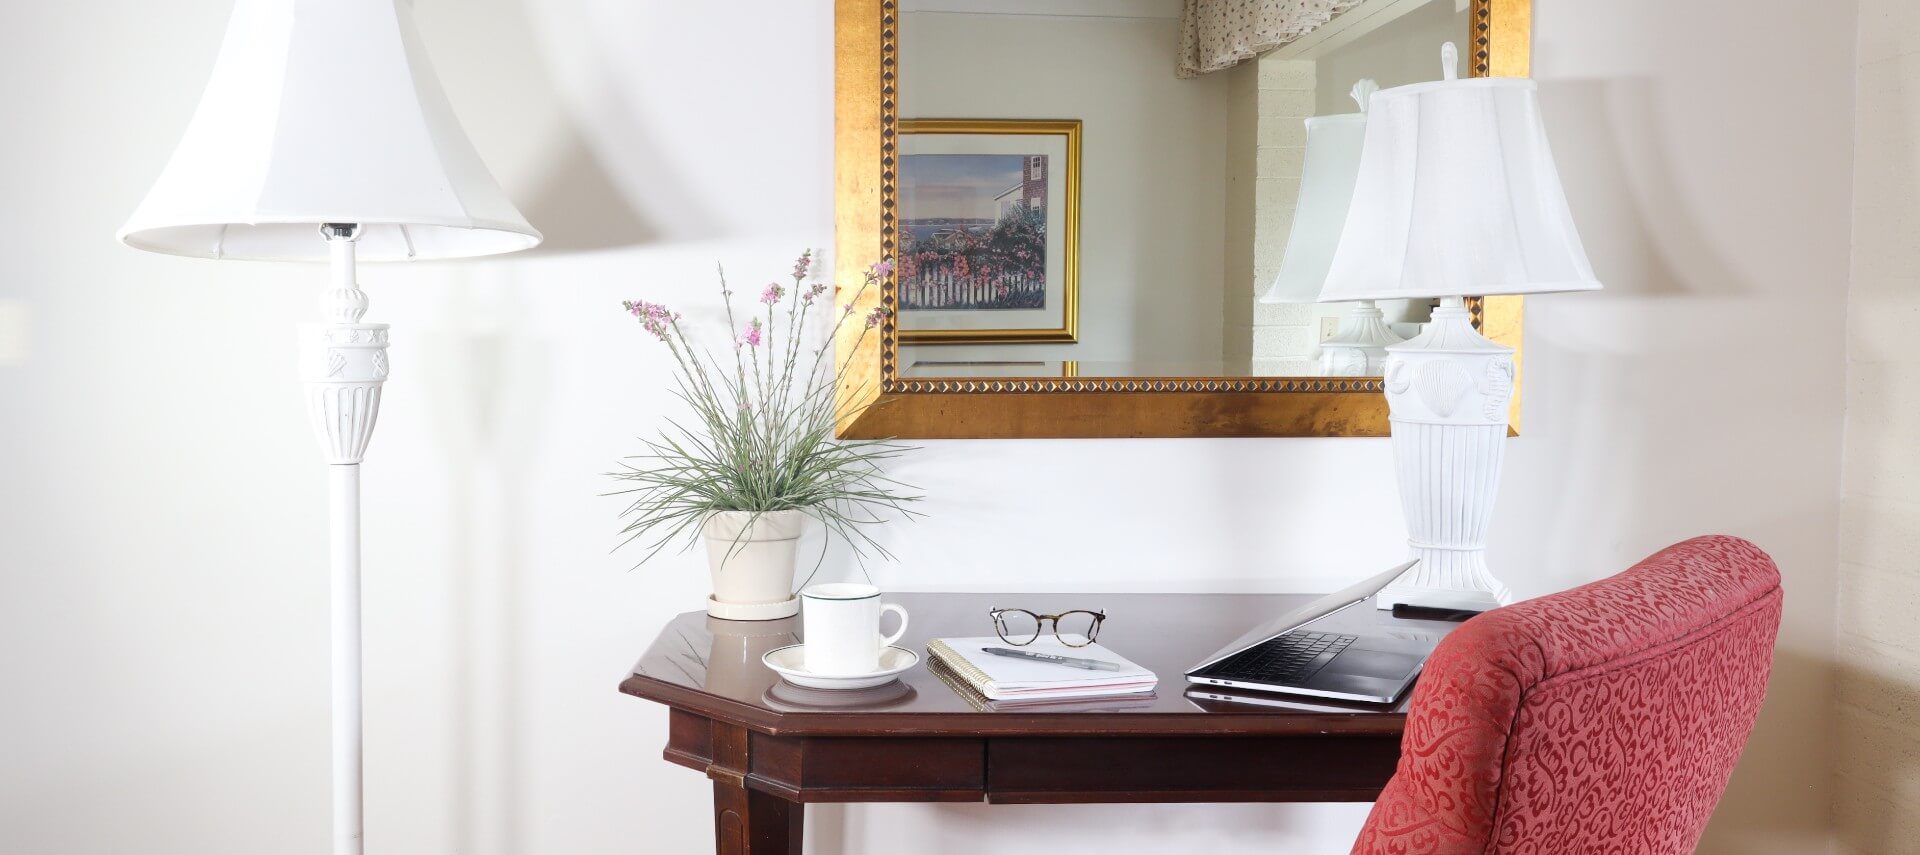 Writing desk with red chair, two white lamps, vase of flowers and gold framed mirror